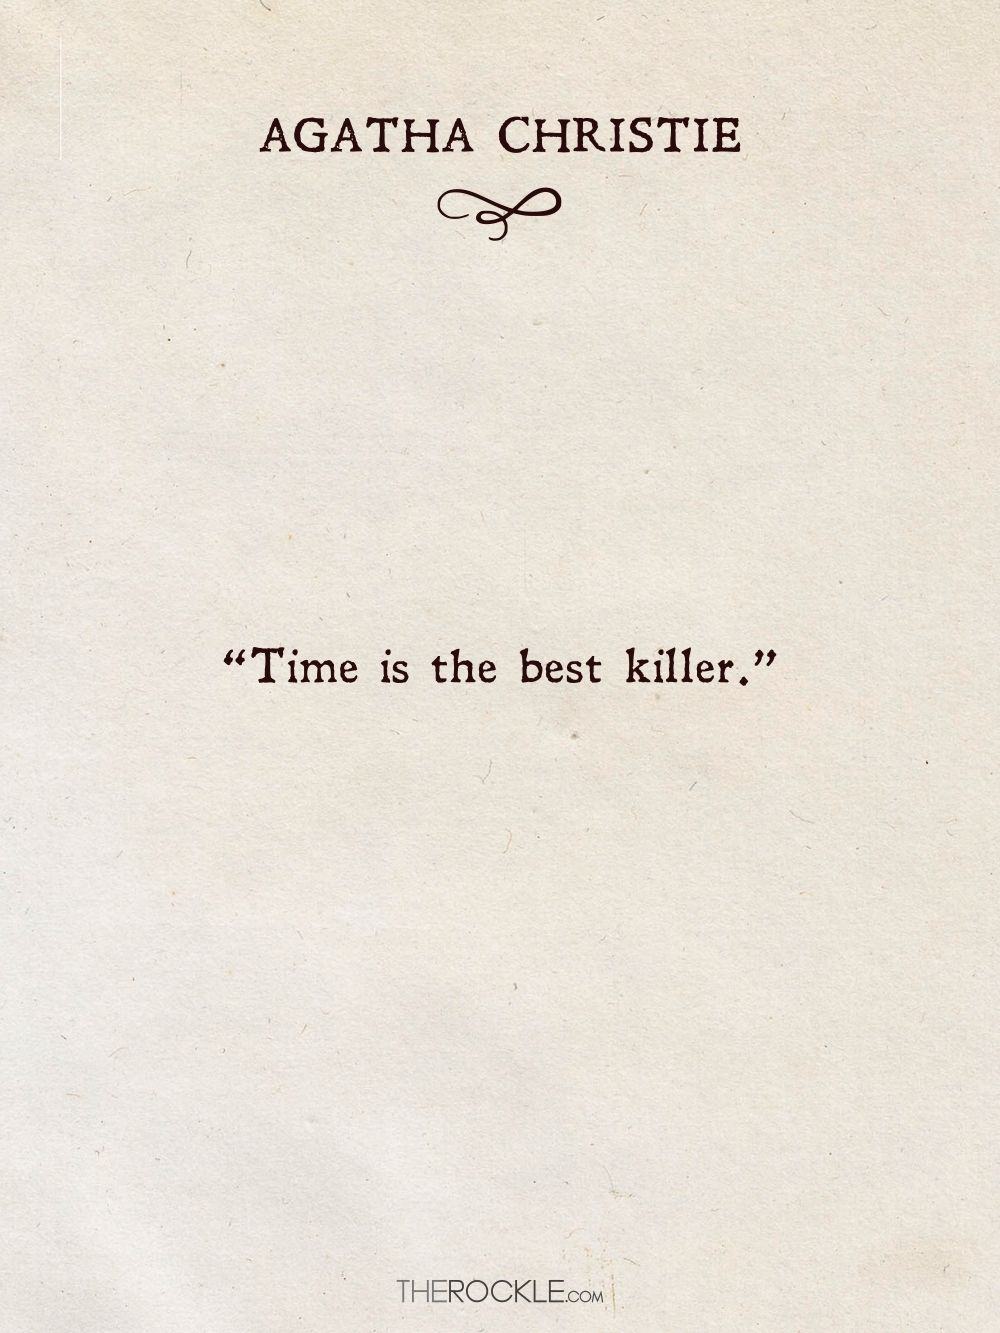 “Time is the best killer.” ― Agatha Christie